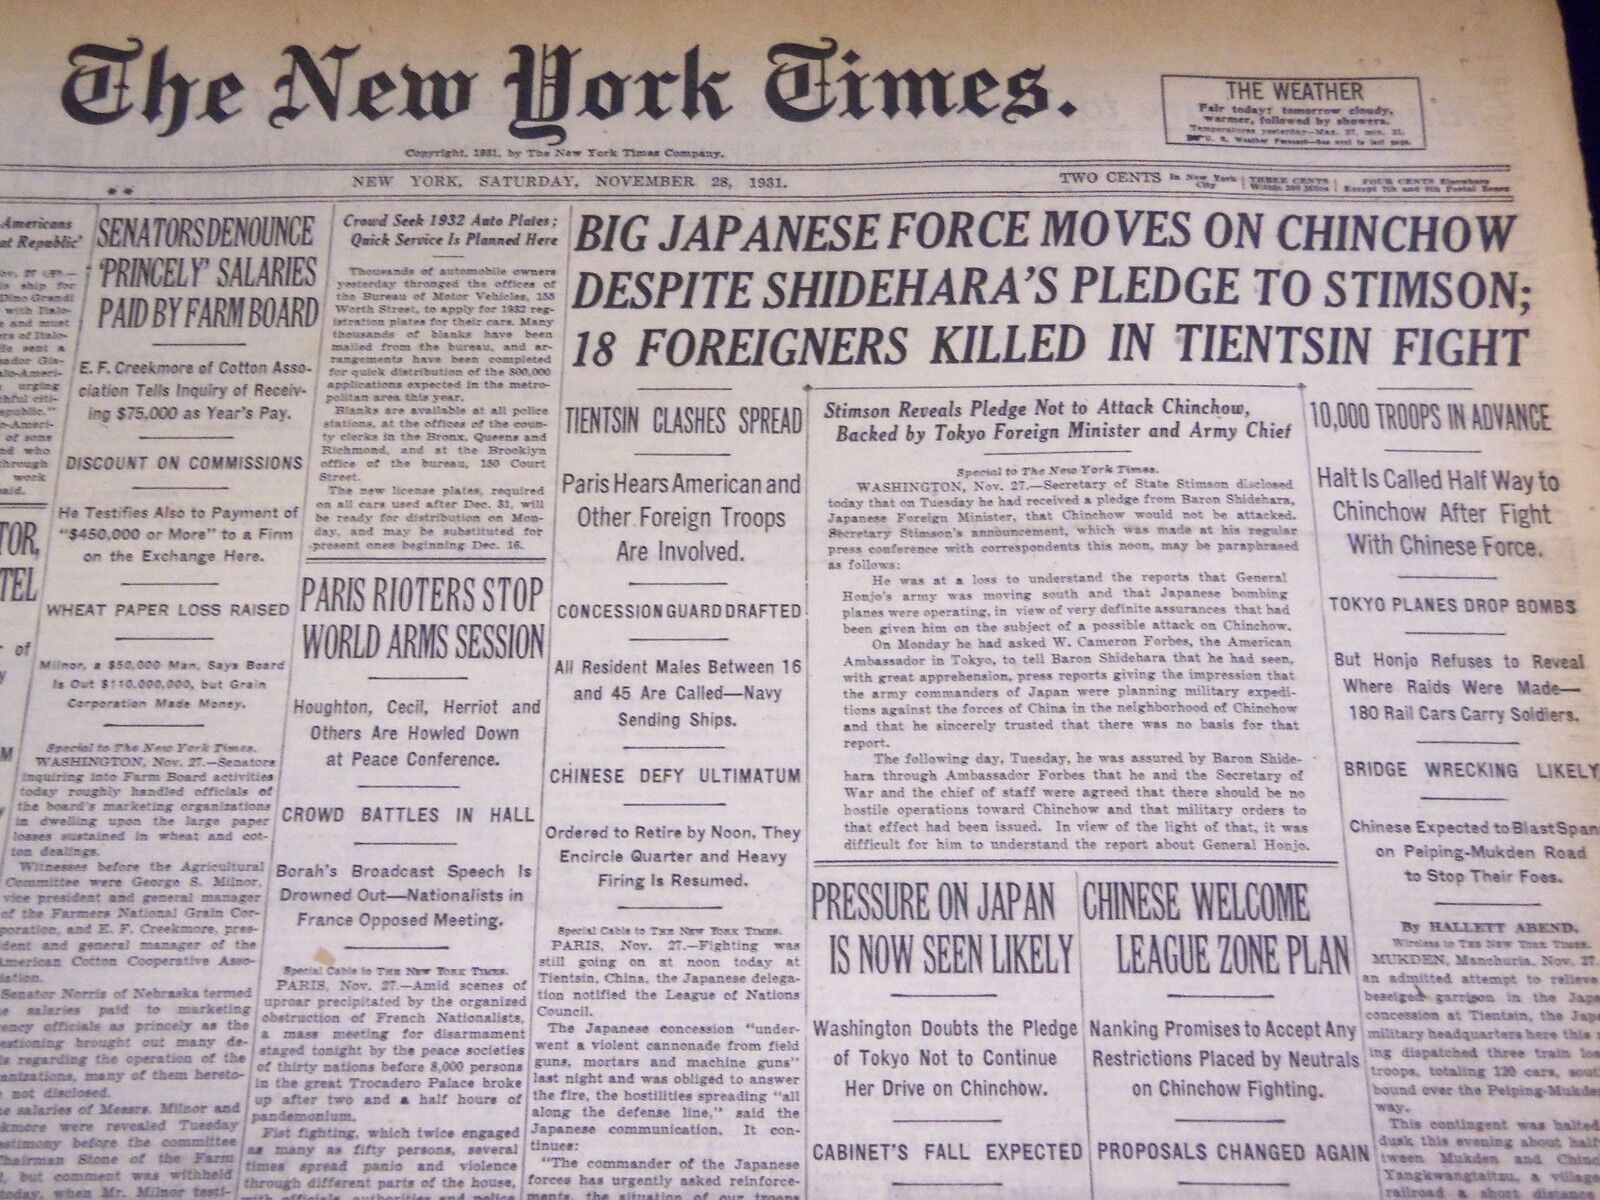 1931 NOV 28 NEW YORK TIMES - JAPANESE FORCE MOVES ON CHINCHOW - NT 2158